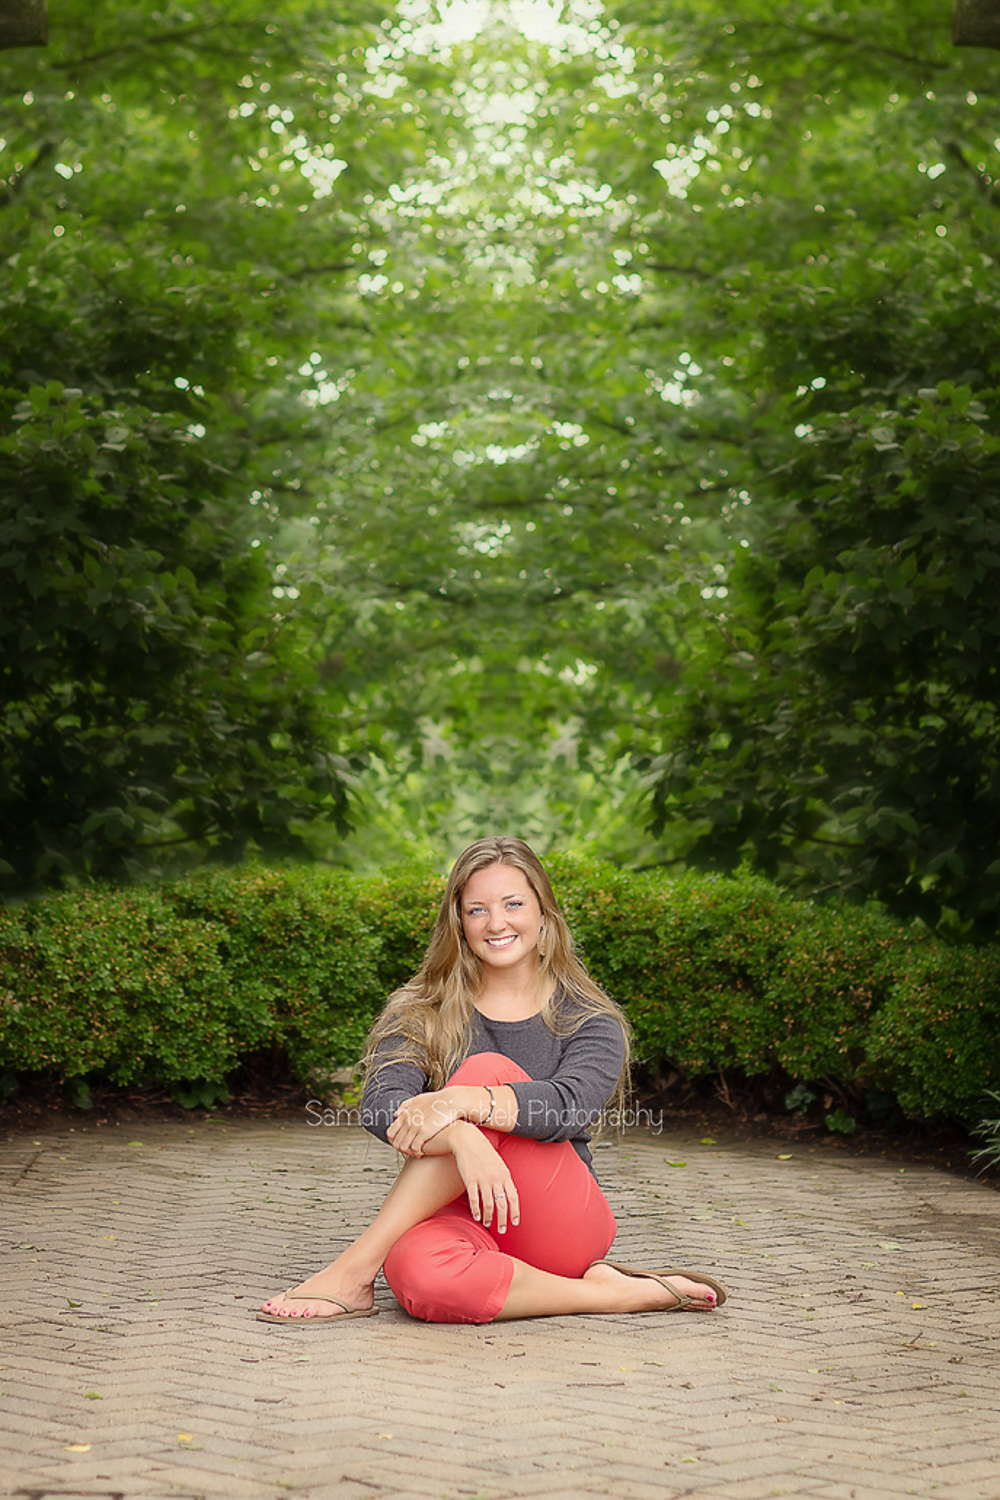 alyssa sits in a gazebo at Ault Park for a SENIOR PHOTO SESSION